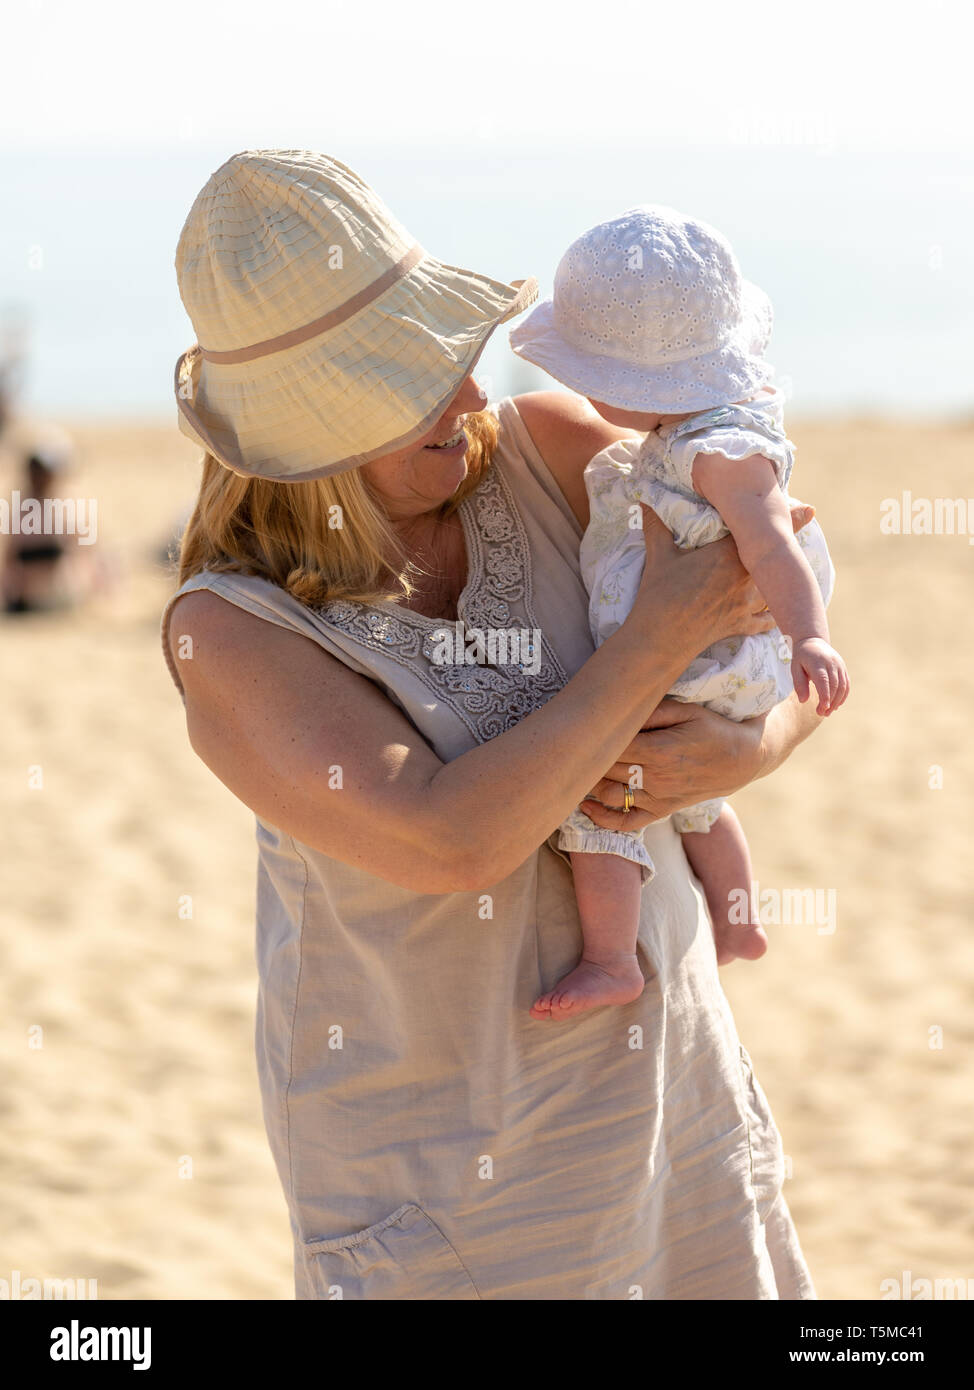 Grandmother holding a baby, both wearing sunhats for protection on a hot and sunny day on a beach. Stock Photo